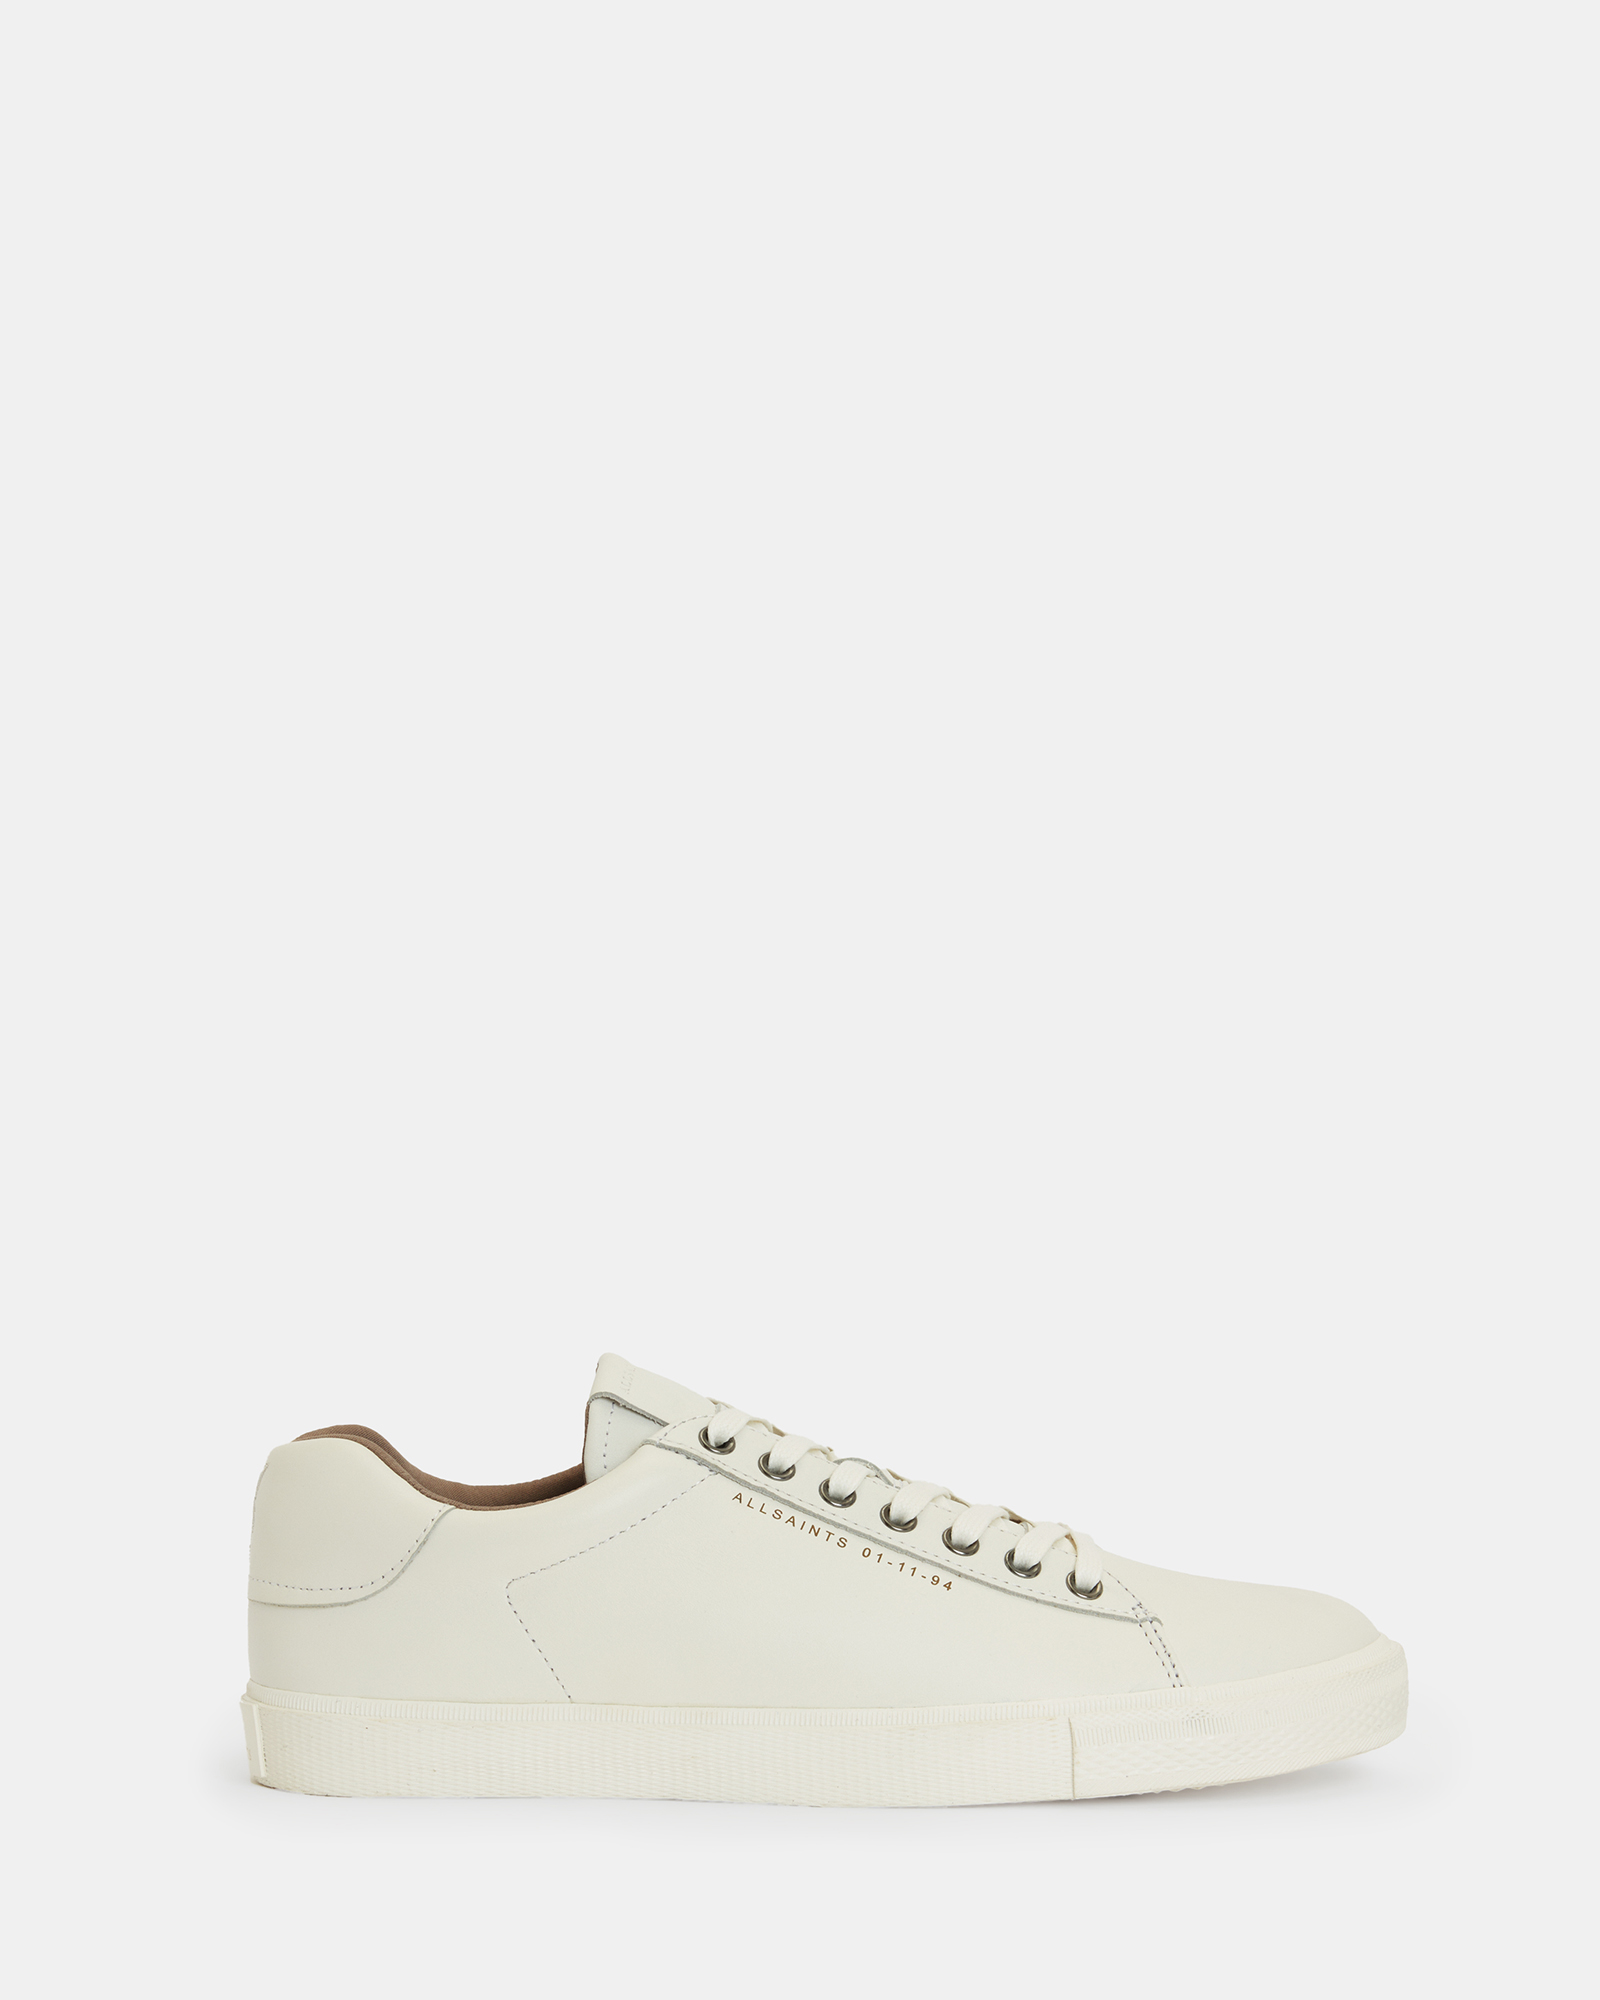 AllSaints Brody Leather Low Top Trainers,, White